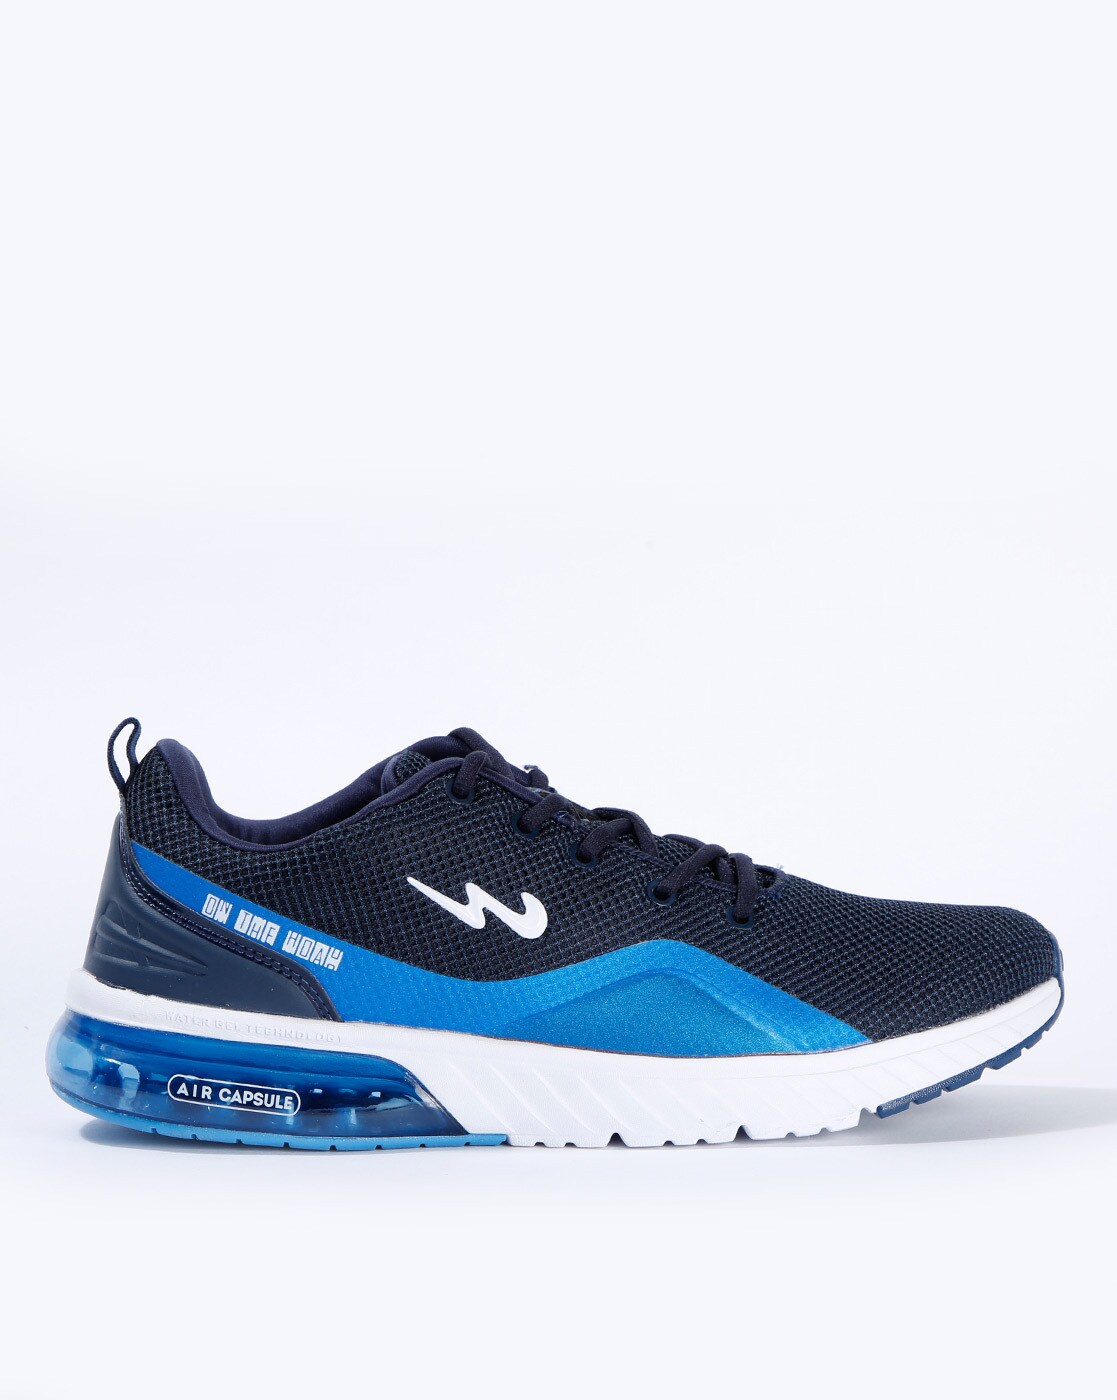 campus sports shoes for mens